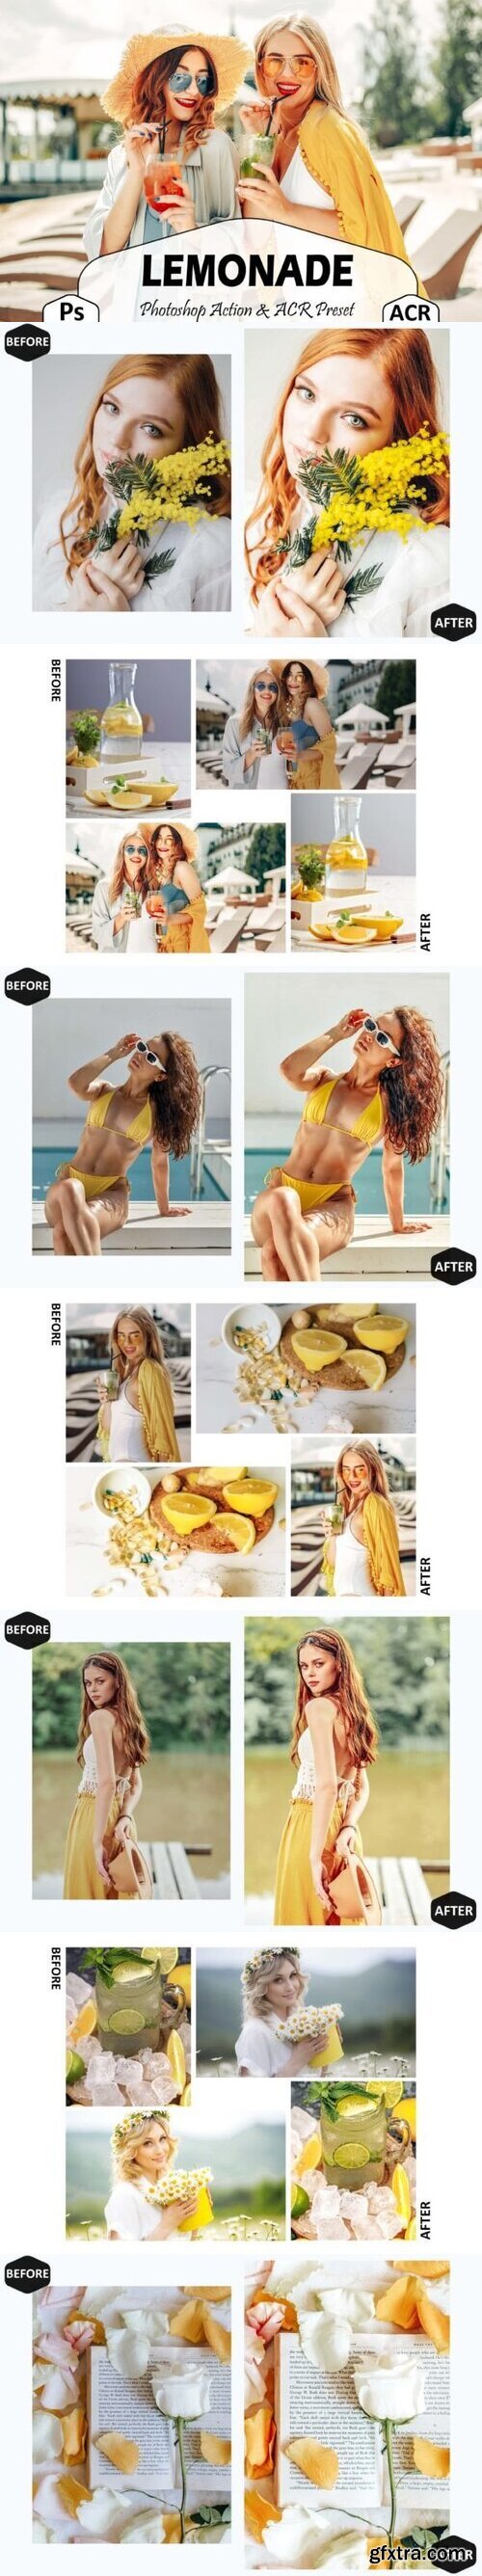 10 Lemonade Photoshop Actions and ACR